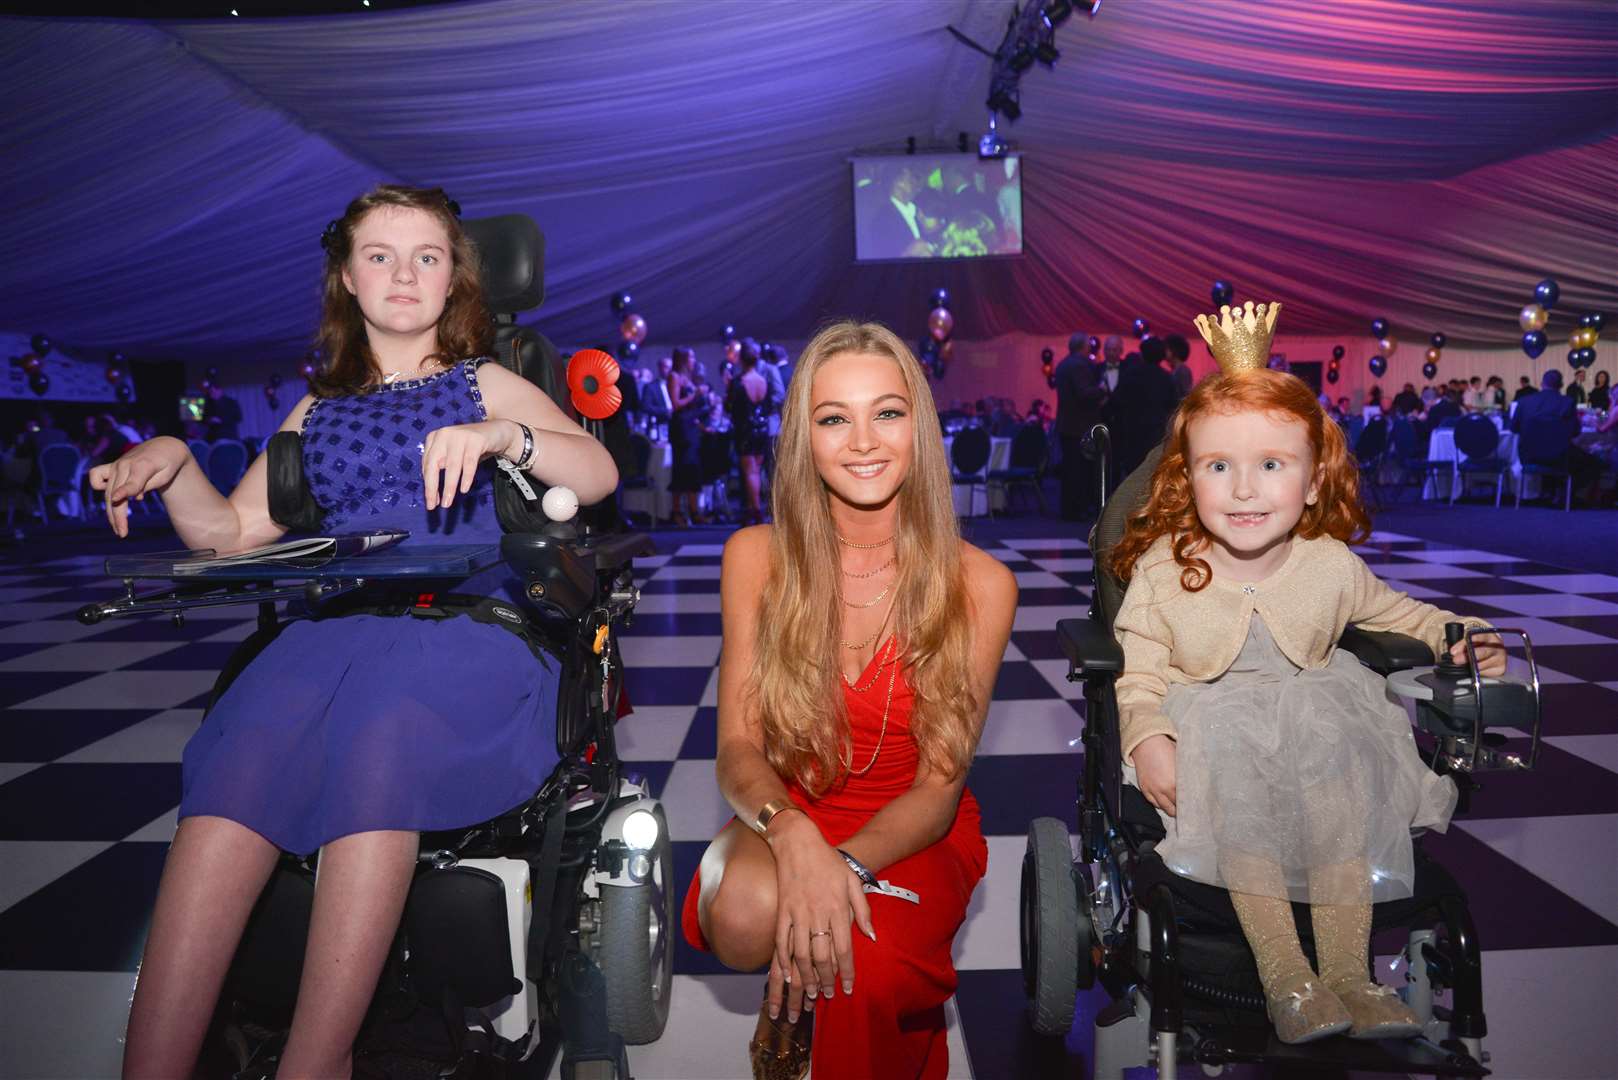 Shelby with Katy and Beau, two young girls who have been helped by the Friends of Shelby Newstead charity with the purchase of mobility chairs